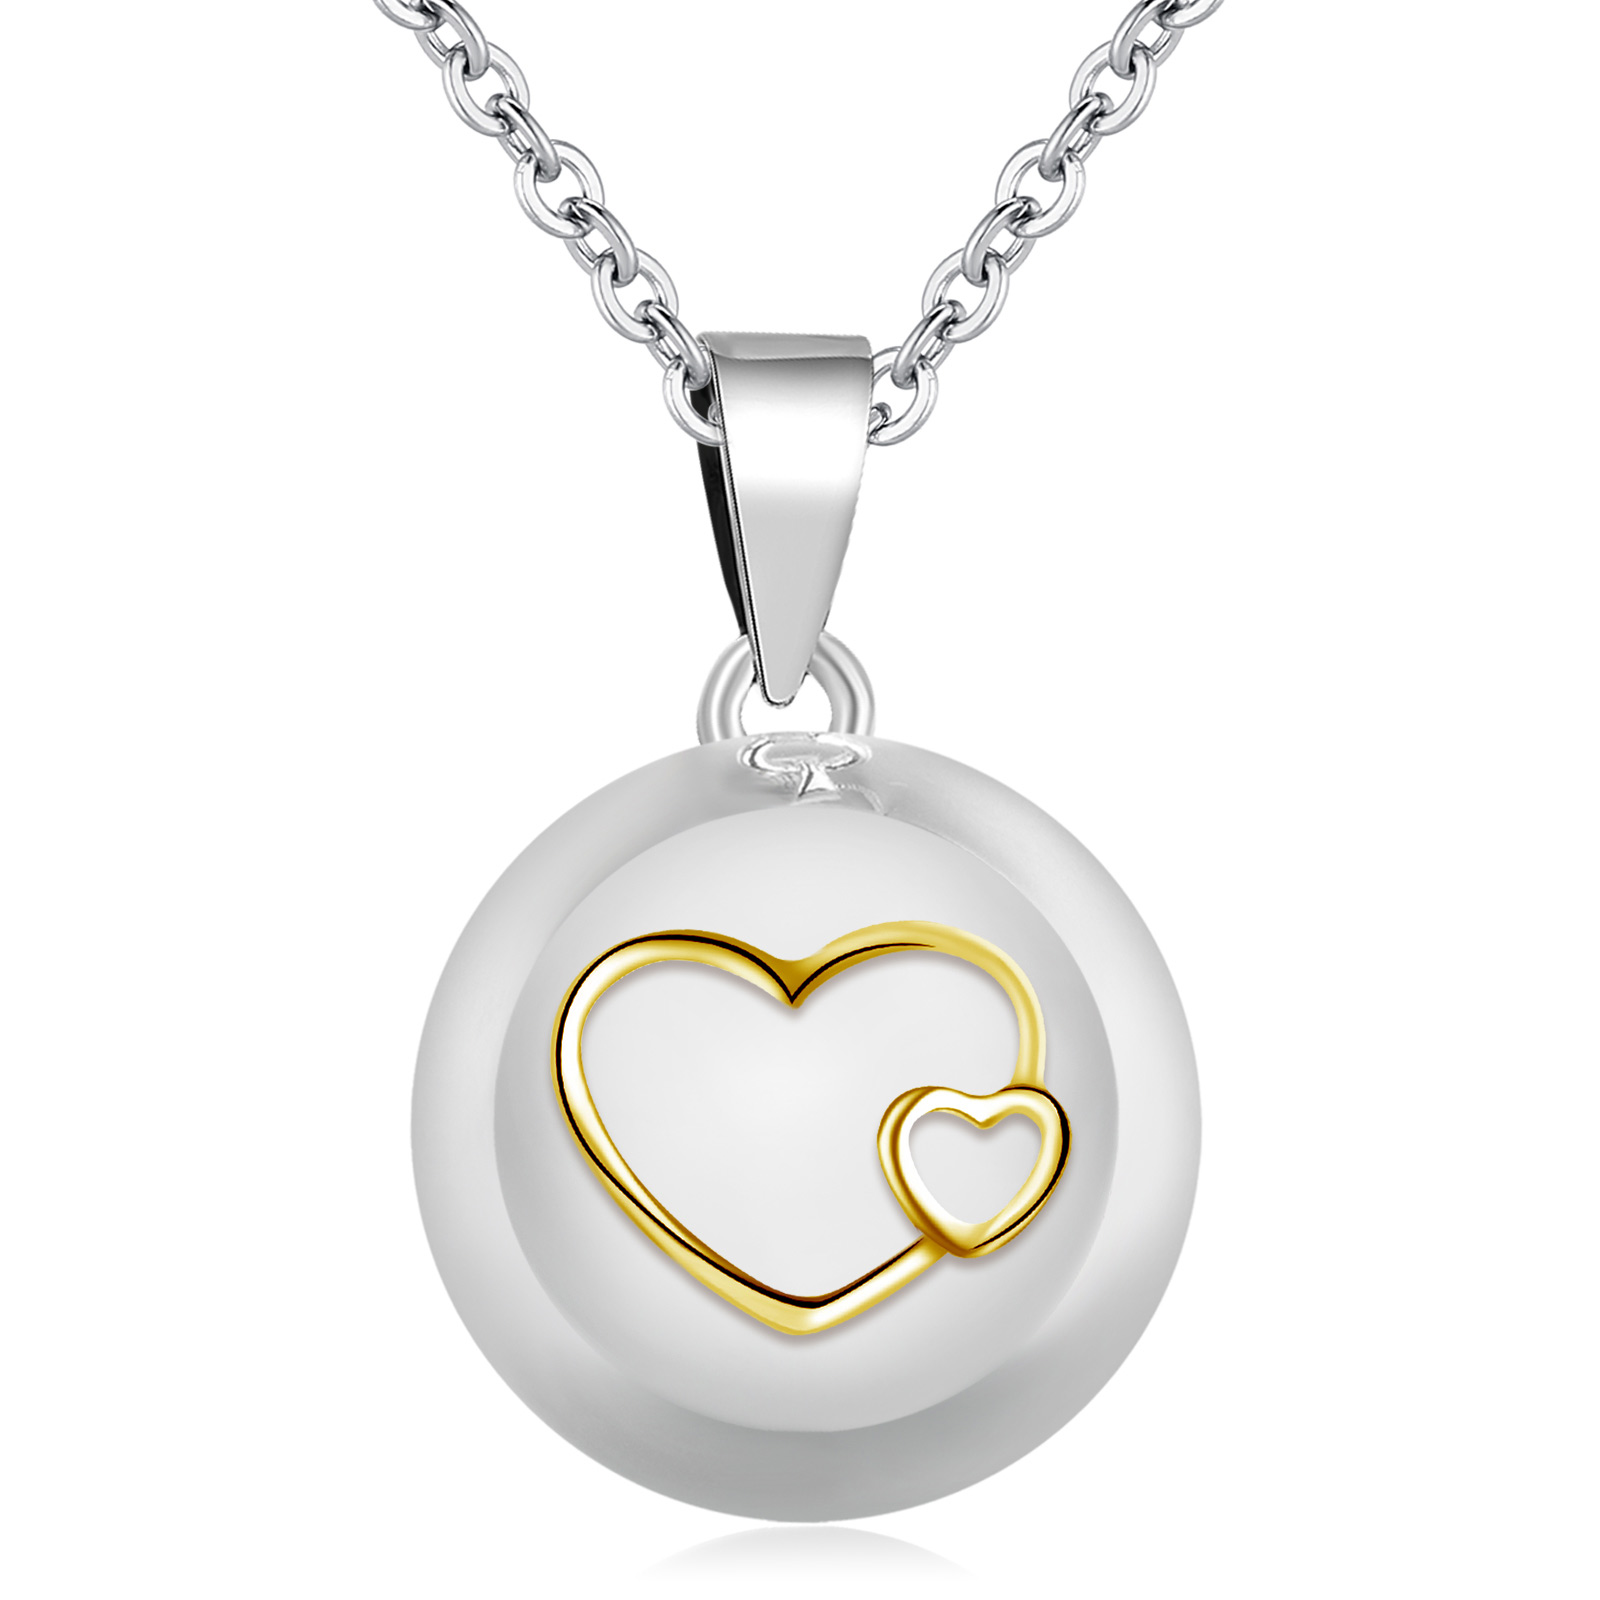 Merryshine Jewelry Sterling Silver Harmony Ball Pendant Pregnancy Angel Caller Chime Necklace